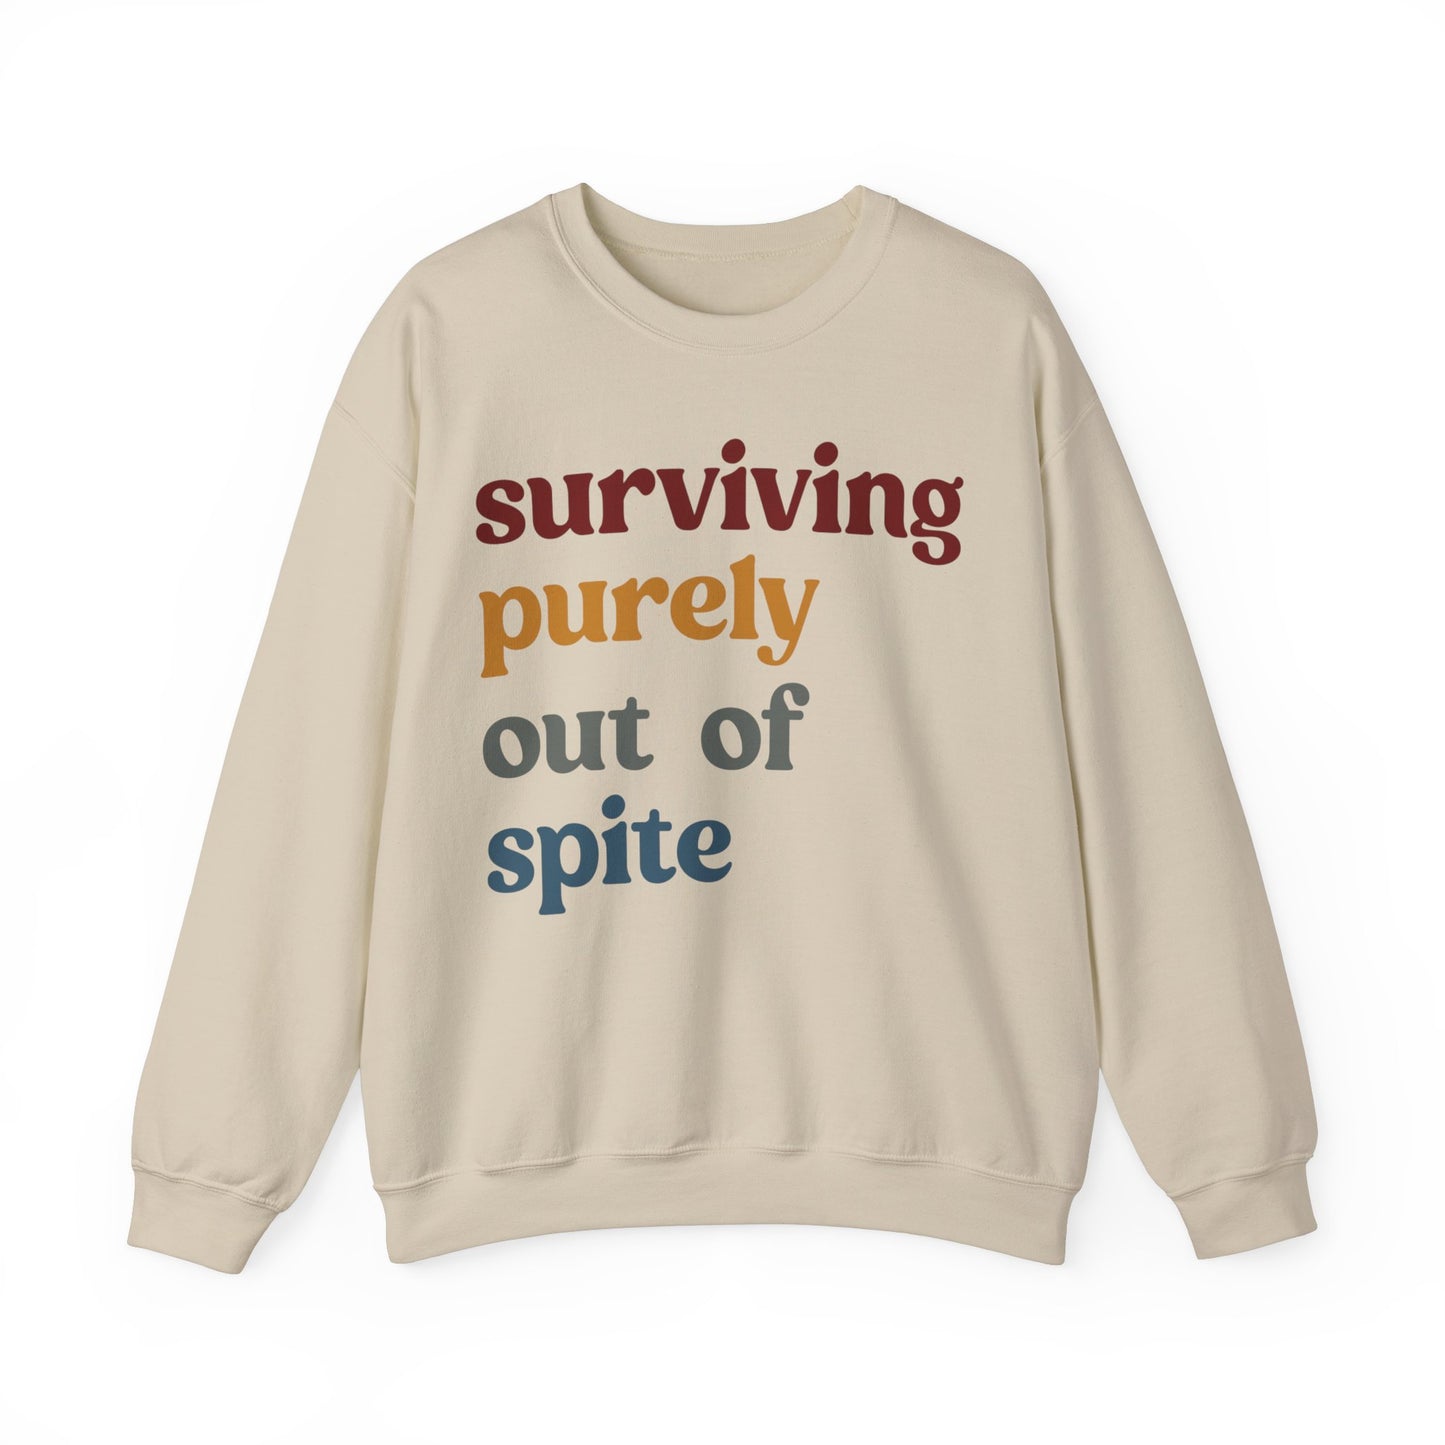 Surviving Purely Out of Spite Sweatshirt, Mental Health, Cancer Survivor, Survivor Sweatshirt, Strong Empowered Women, Iron Lady, S1407